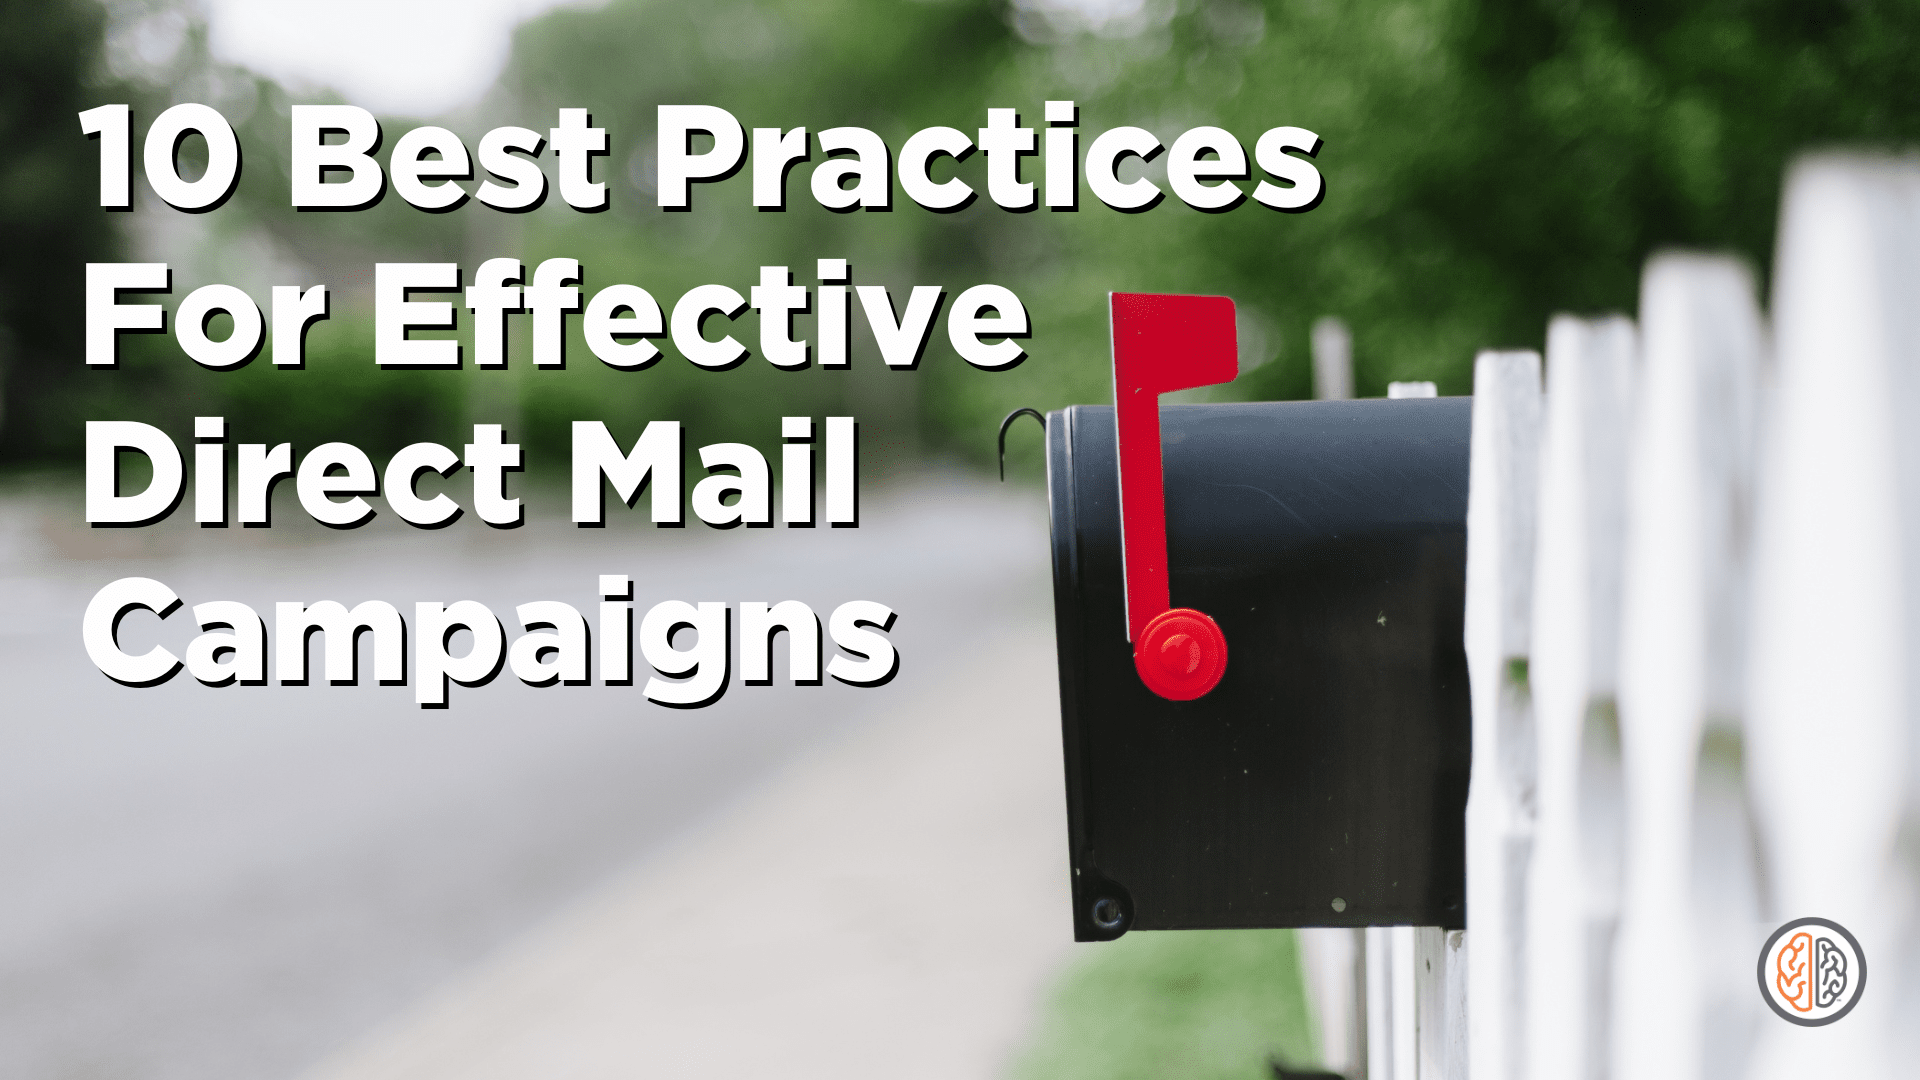 Top Ten Best Practices for Effective Direct Mail Campaigns